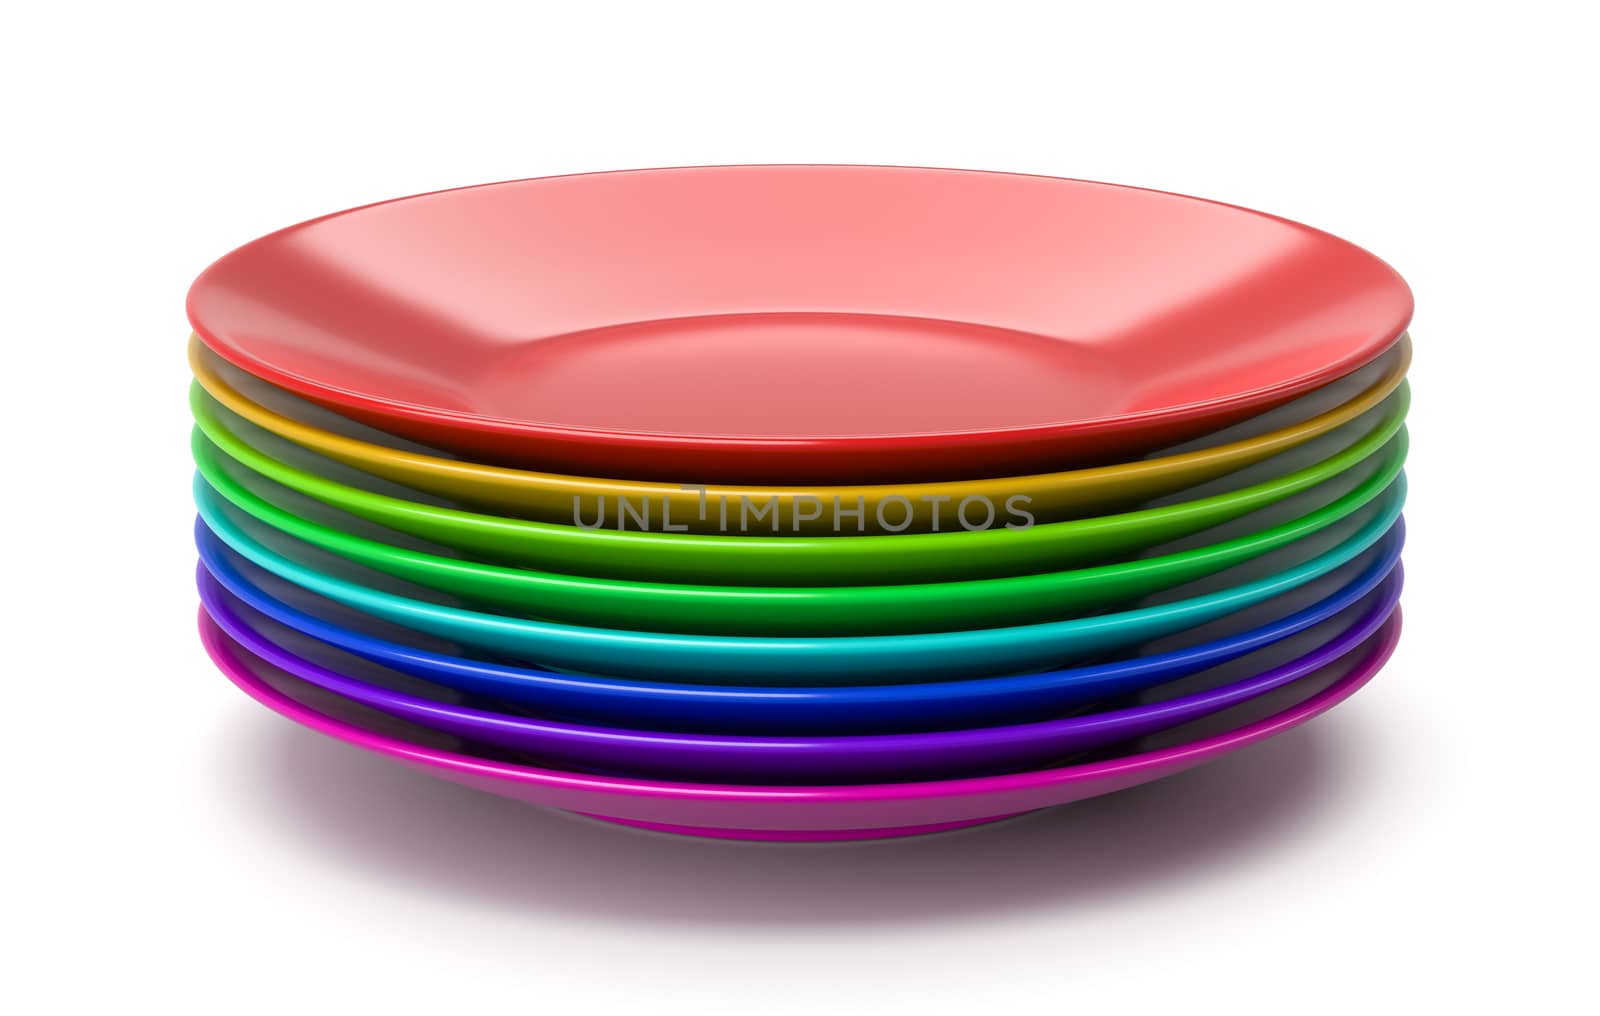 Stack of Clean Colorful Dishes on White Background 3D Illustration